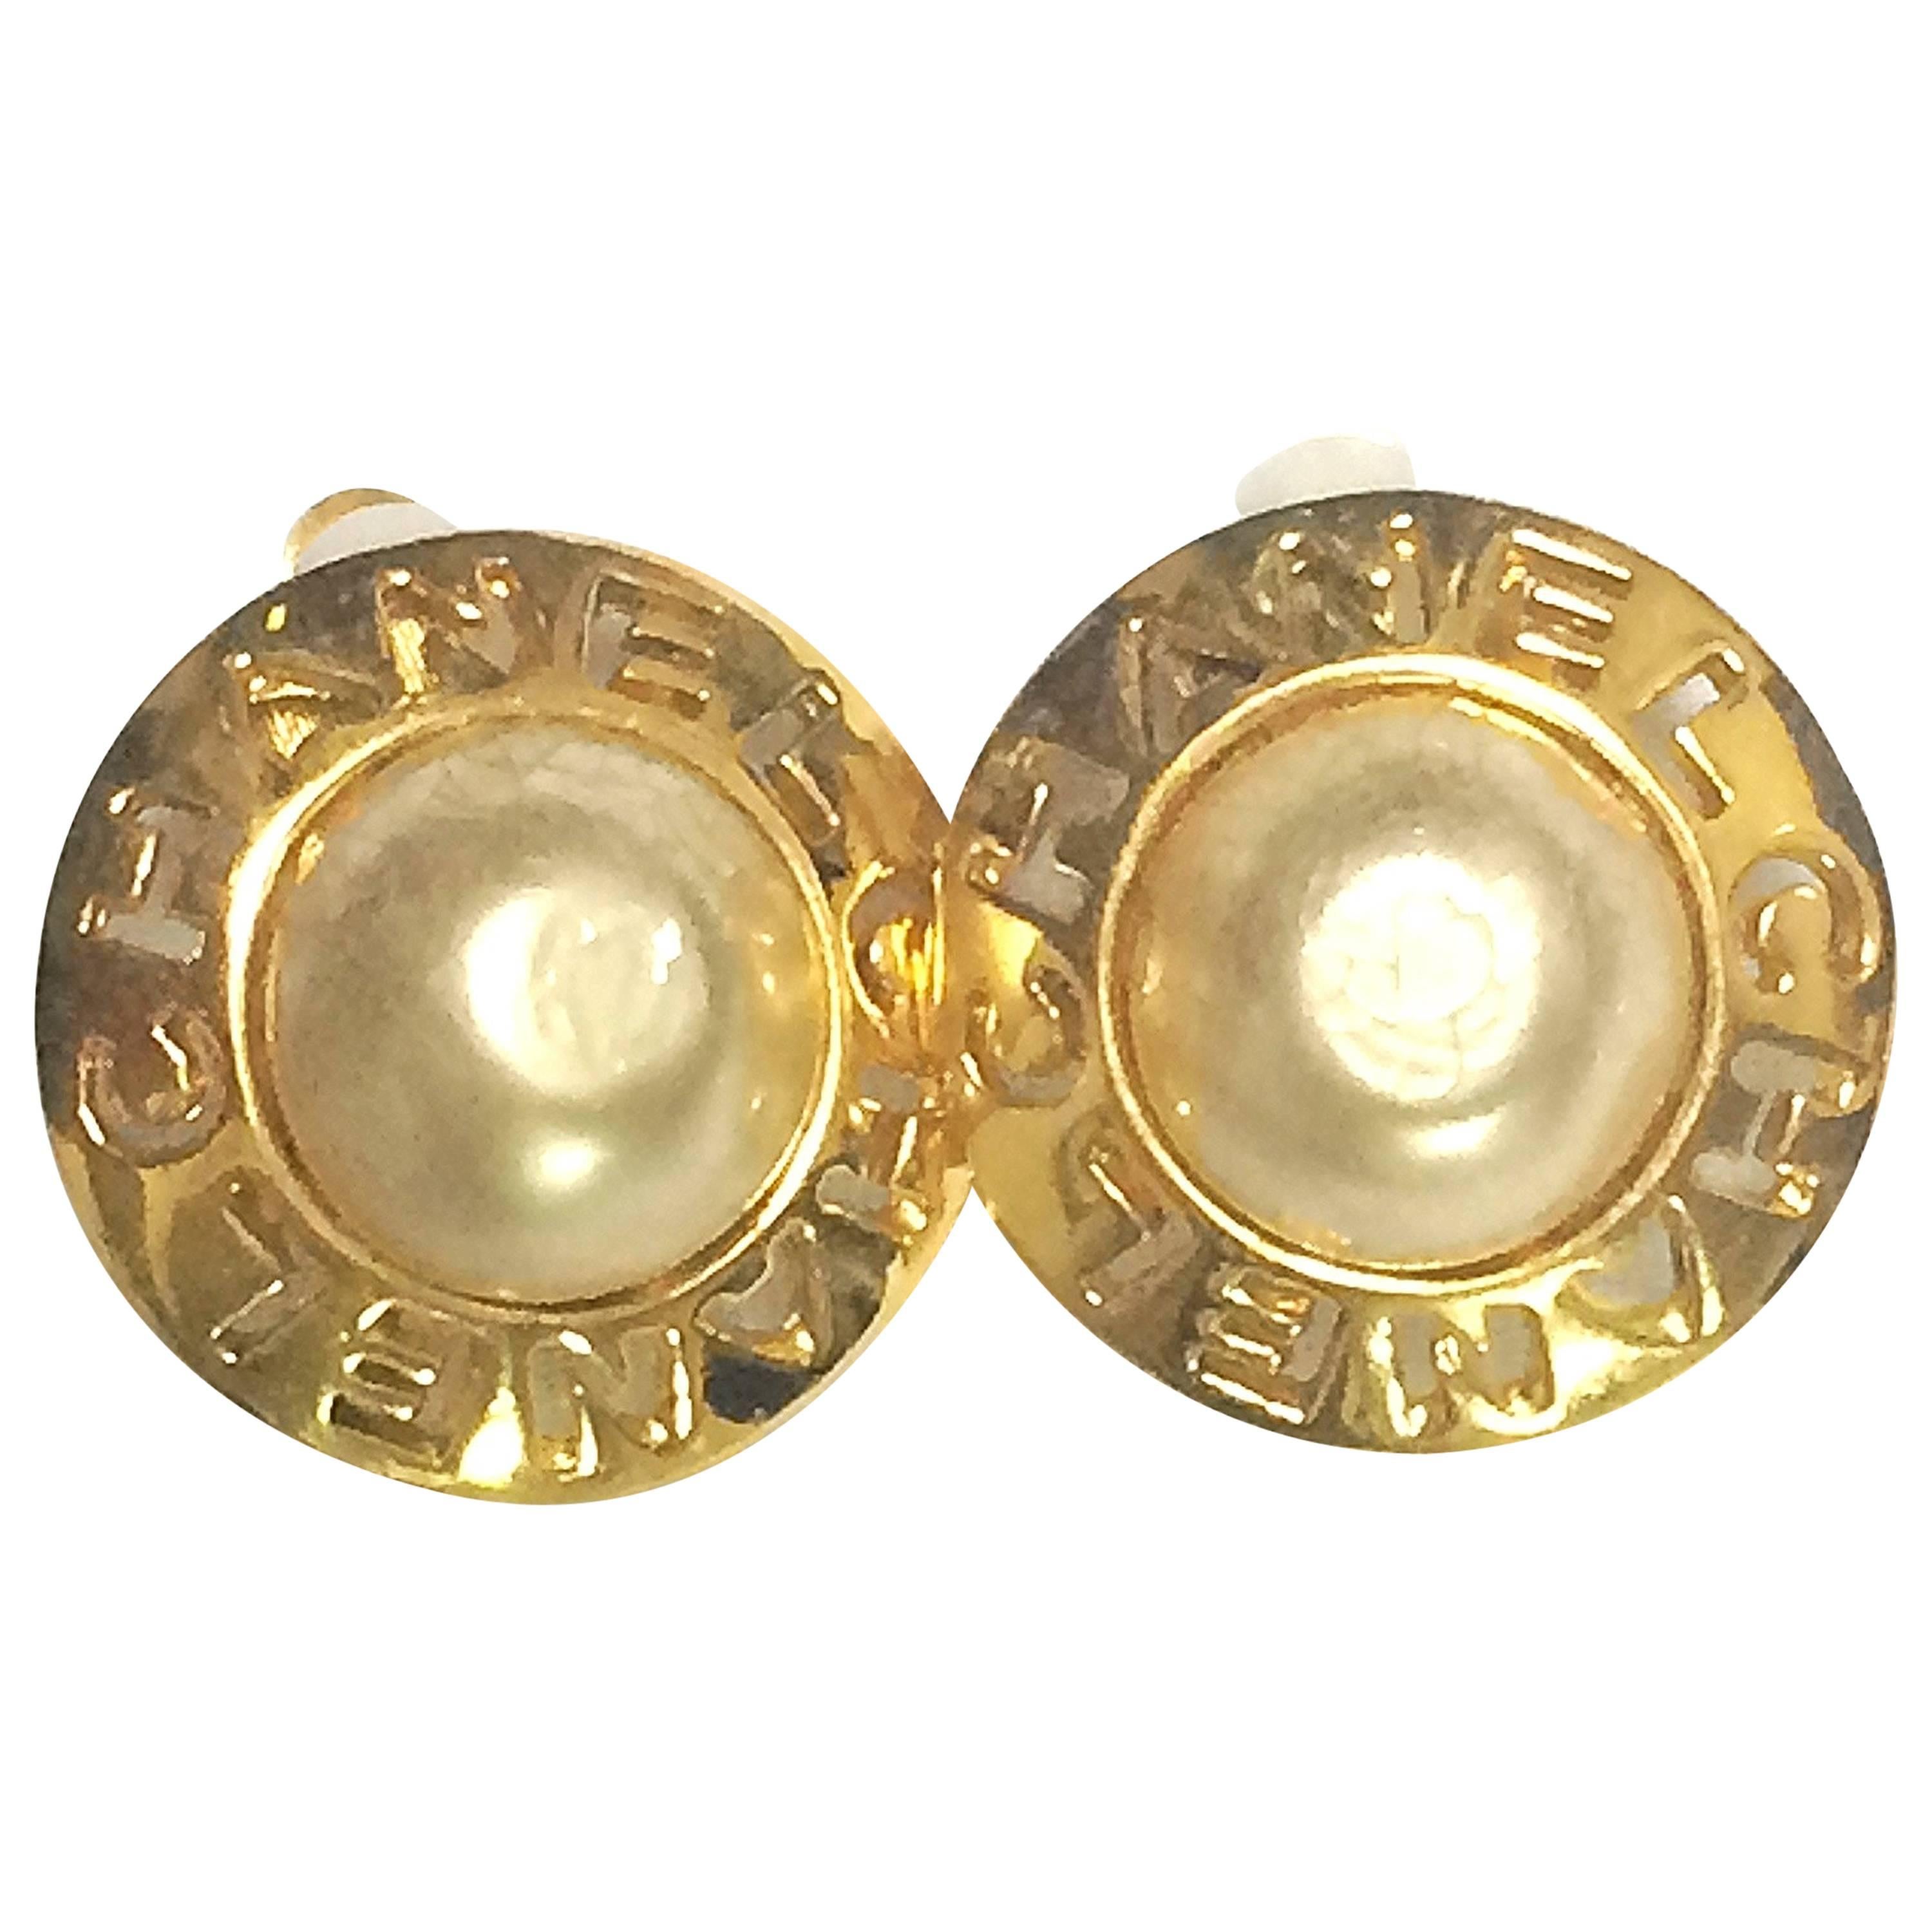 Vintage CHANEL golden round shape faux pearl earrings with cutout logo. Chic.